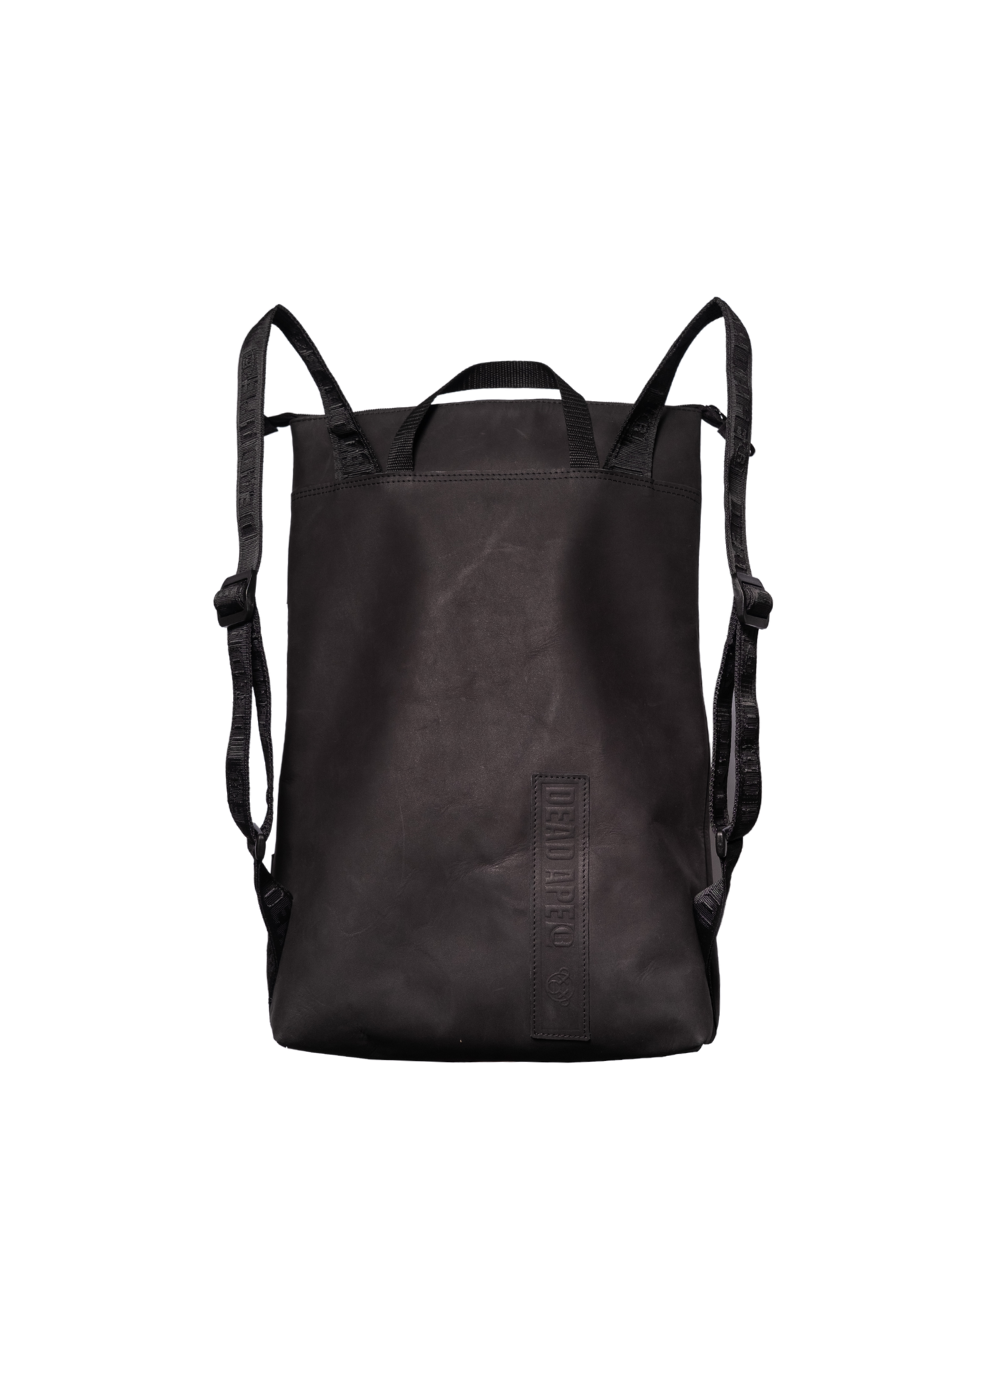 Responsible Streetfashion // Rucksack aus geschliffenem Leder mit 15" Laptop Fach und geprägtem DEAD APE Icon Patch – Spende 10% zur Rettung der Orang-Utans. // Backpack made from polished leather with a compartment for 15" Laptops and embossed DEAD APE icon patch – donate 10% to safe the orangutans.